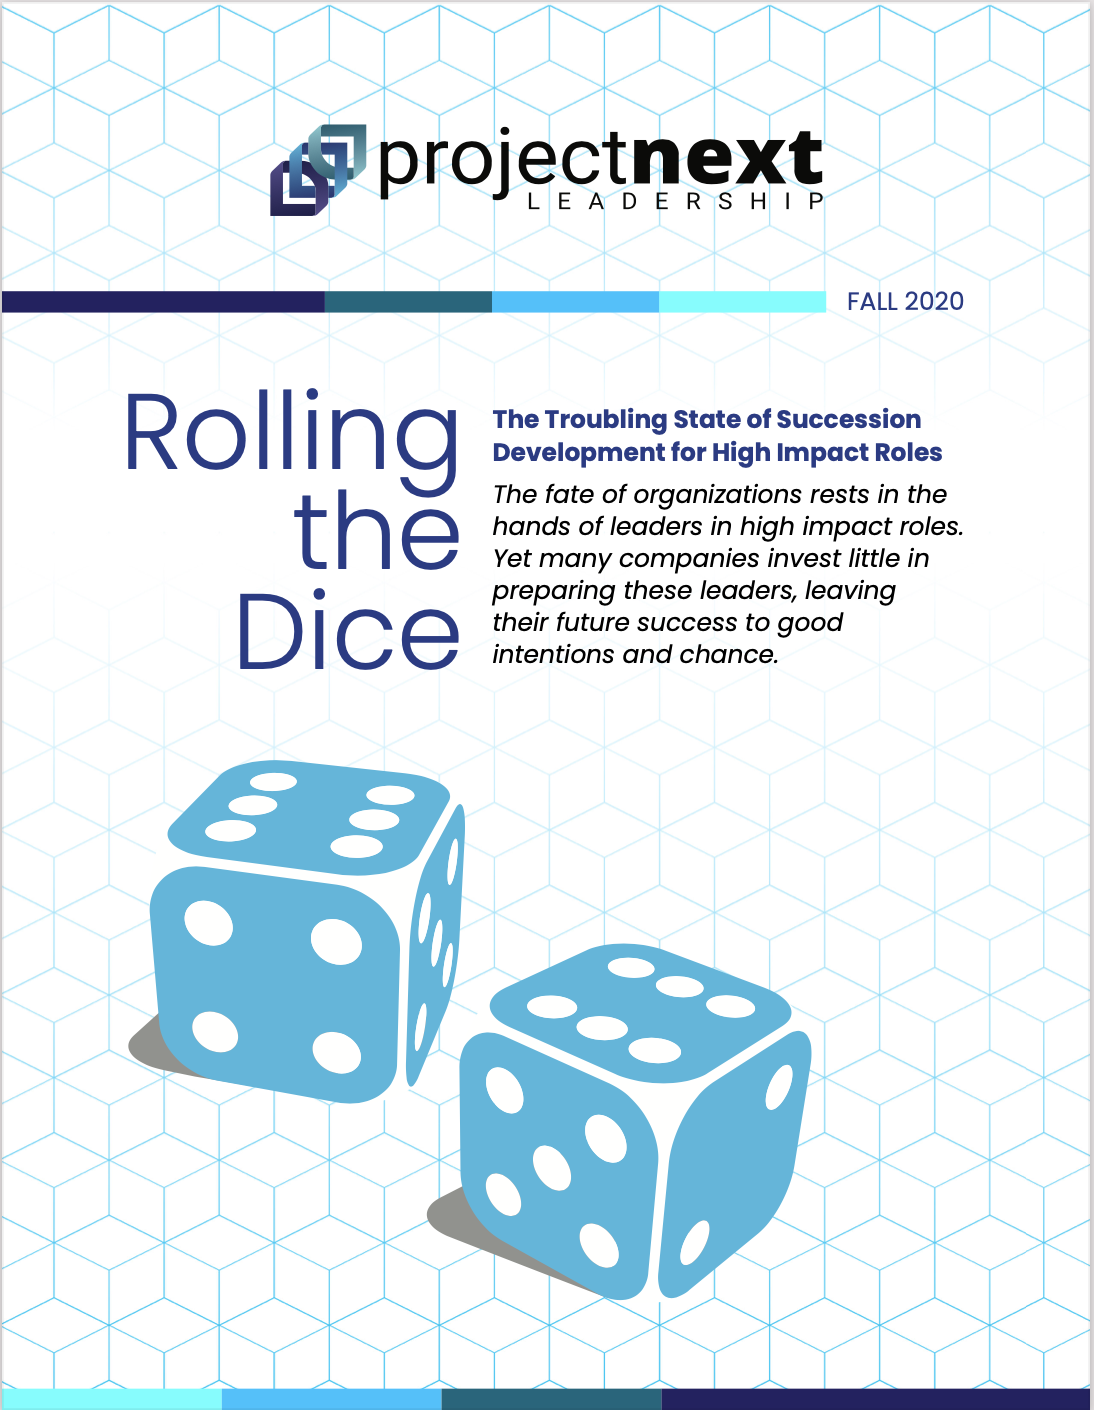 ProjectNext Leadership Announces Research Findings Rolling the Dice: The Troubling State of Succession Development for High Impact Roles